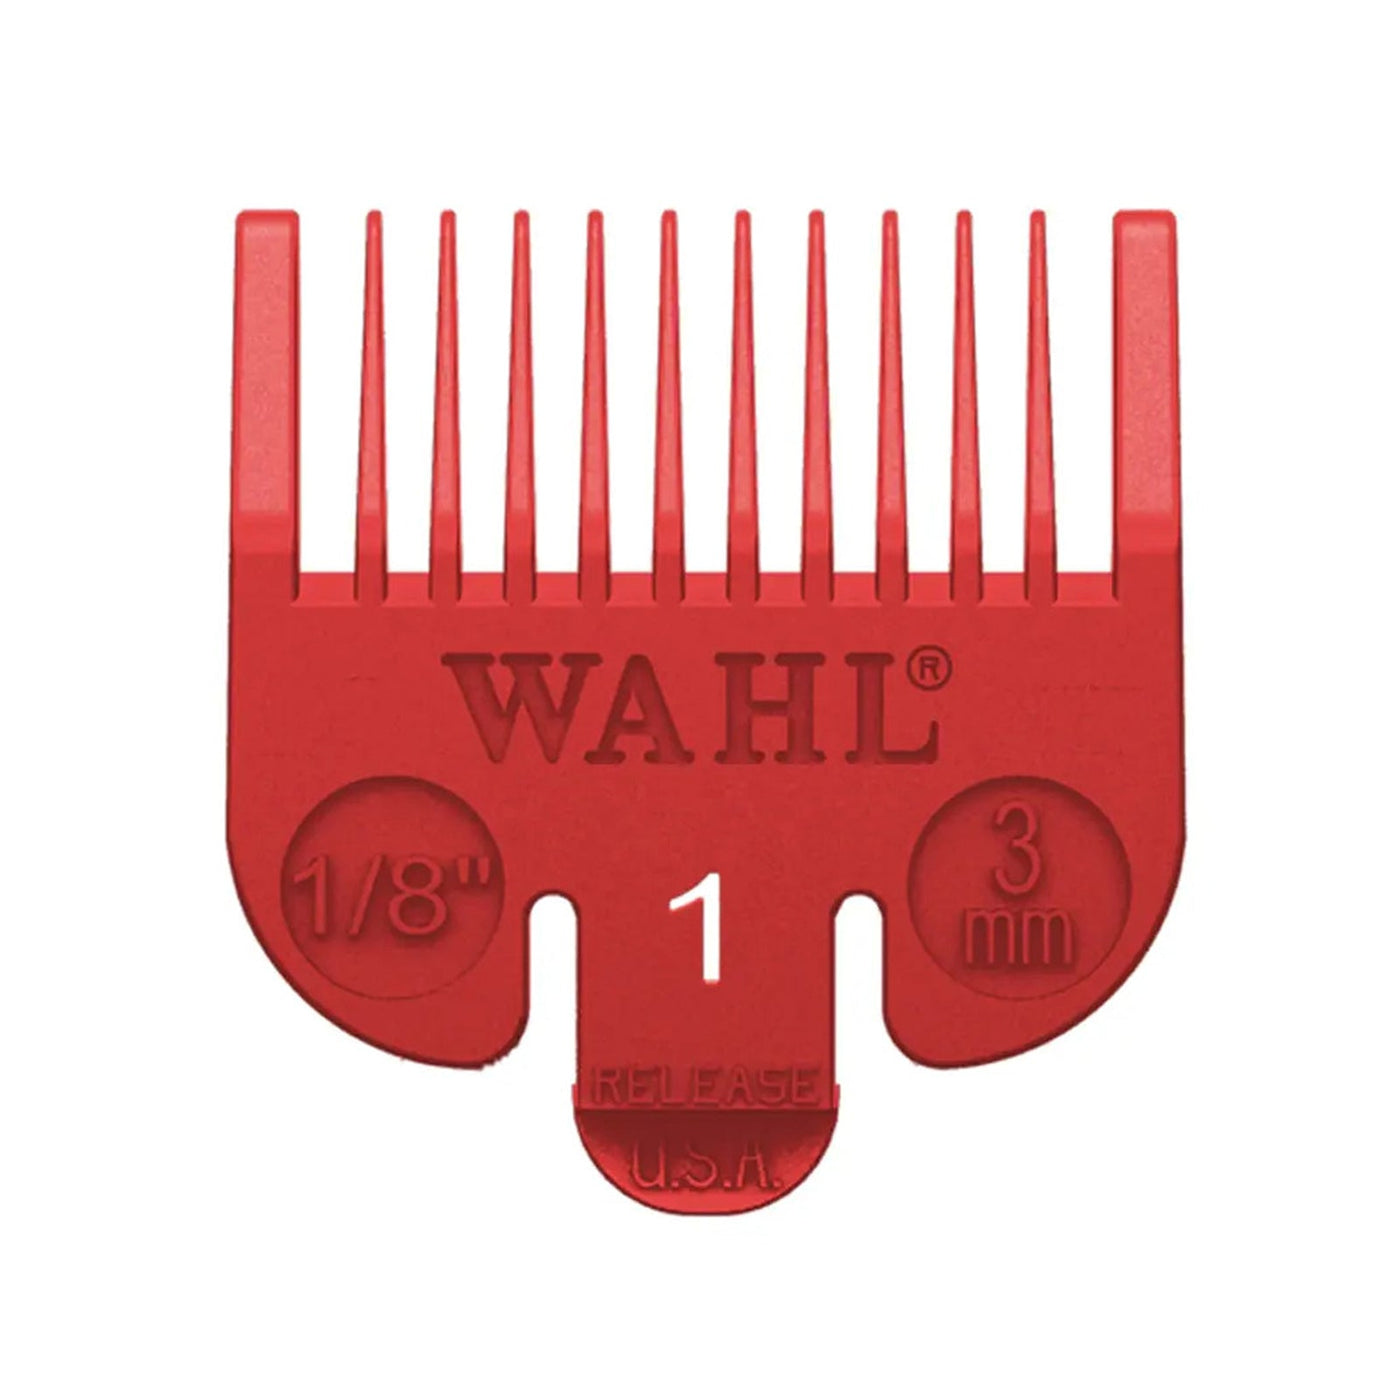 Wahl Coloured Guide Pack #1 to #4 - #1